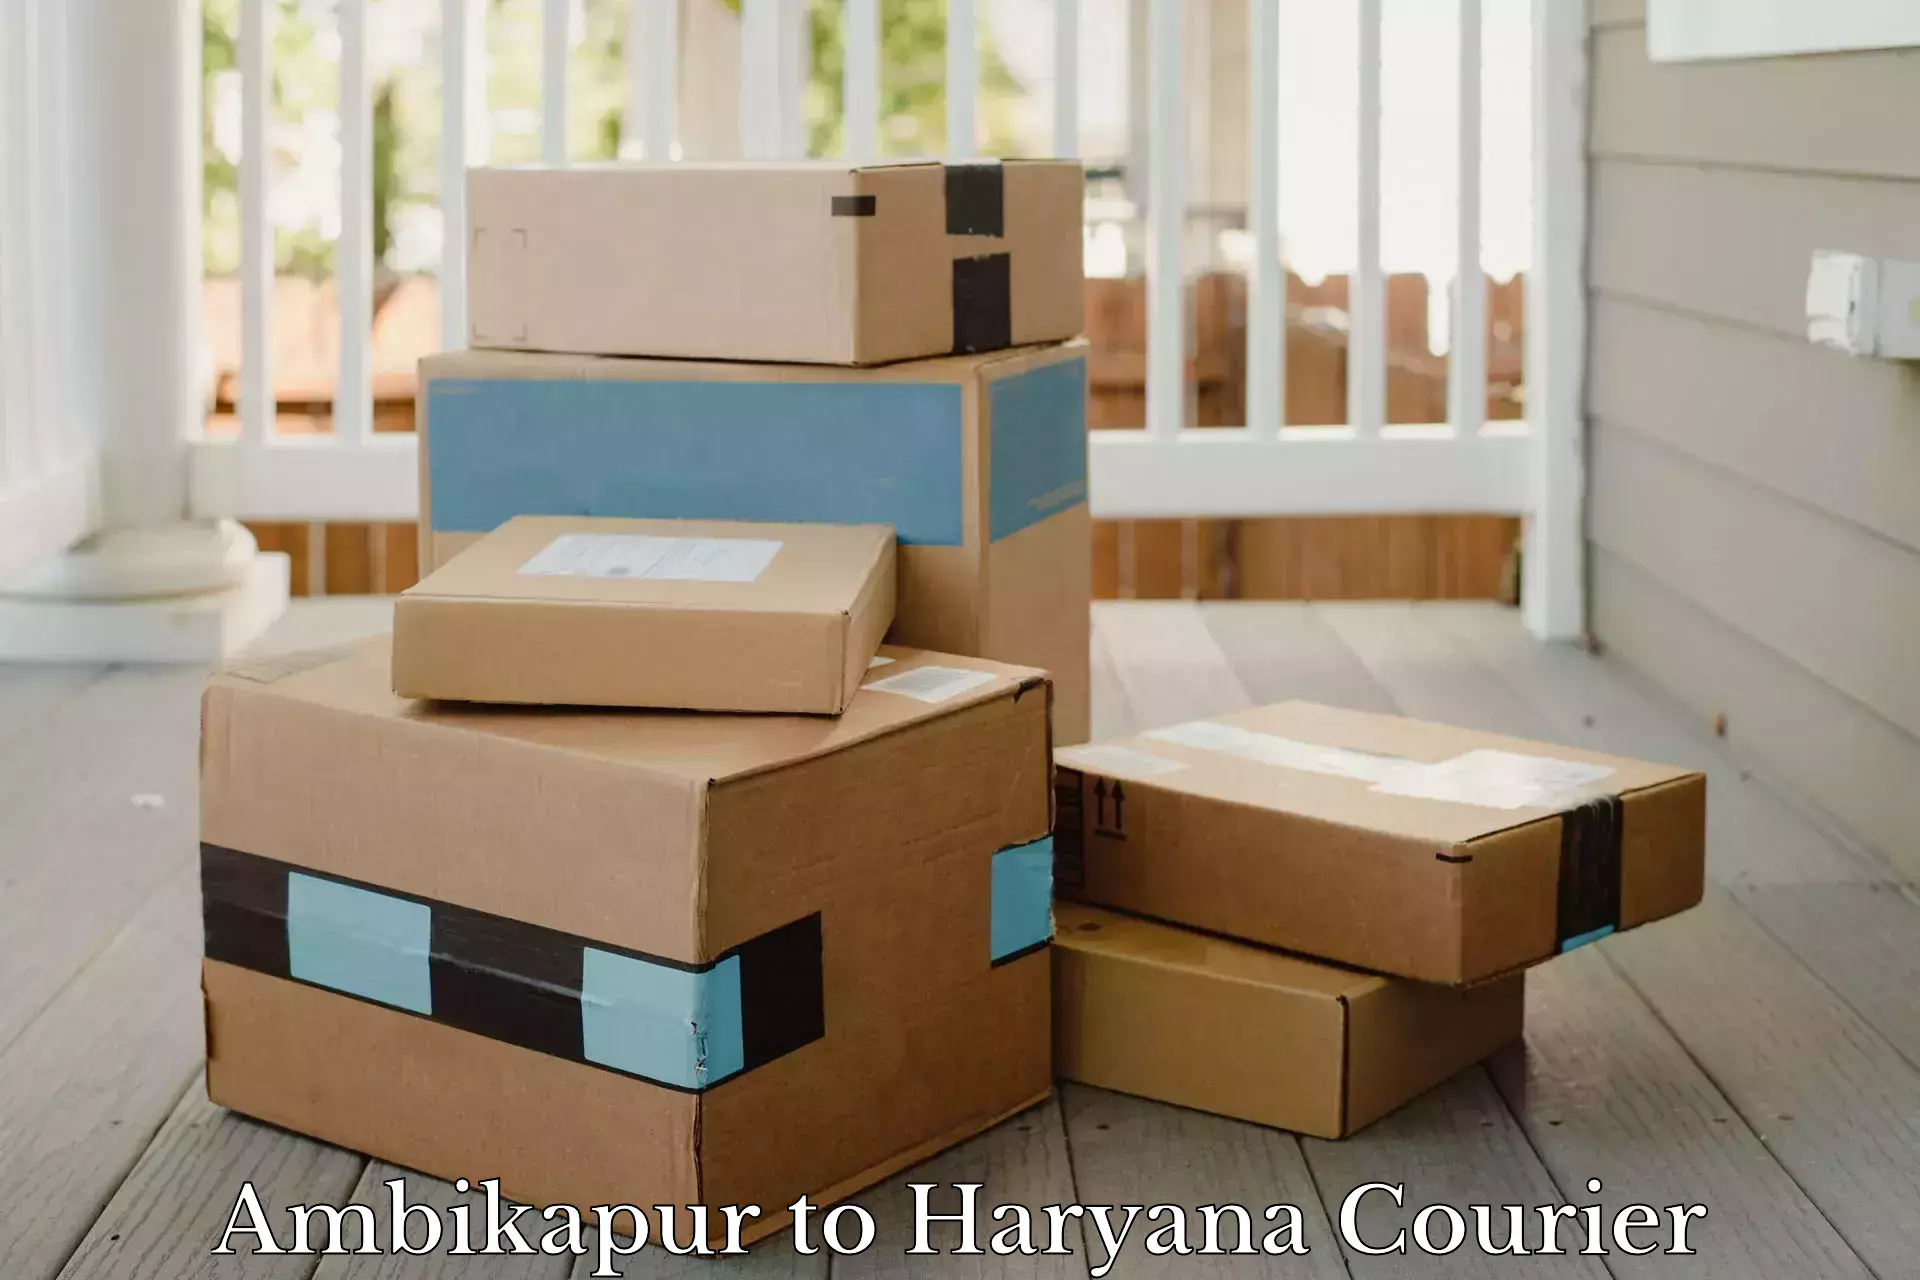 User-friendly delivery service Ambikapur to Panchkula